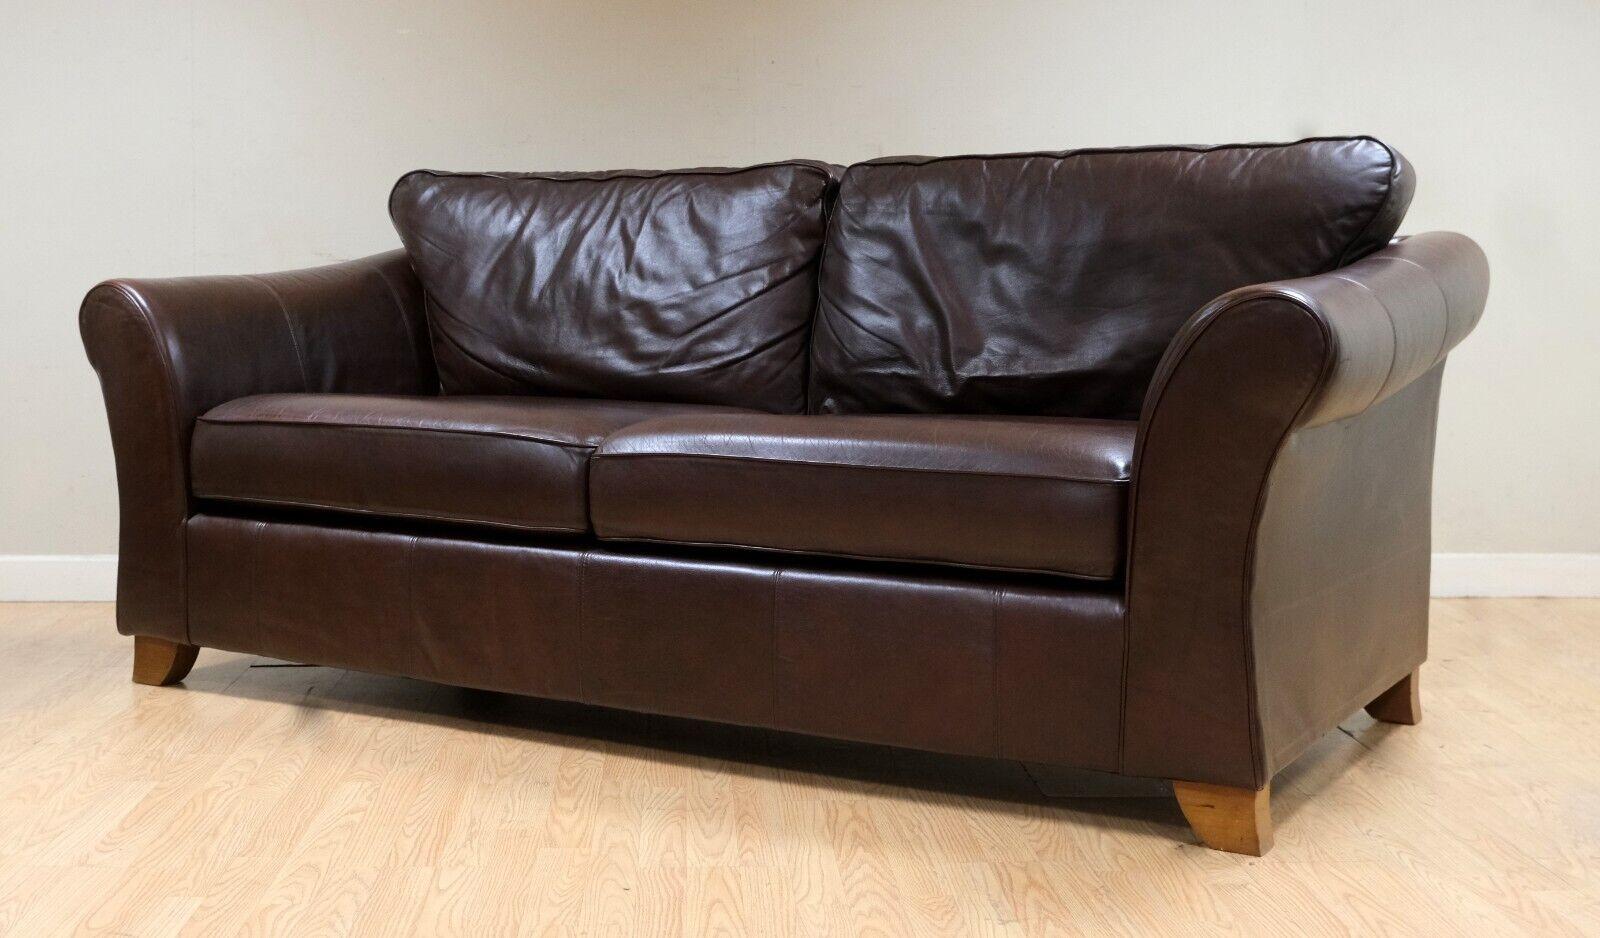 We are delighted to offer for sale this elegant Marks & Spencer Abbey collection brown leather two seater sofa.

This sothiphicated and soft leather sofa is ideal for any living room style, as the design will never be out of fashion. Marks &